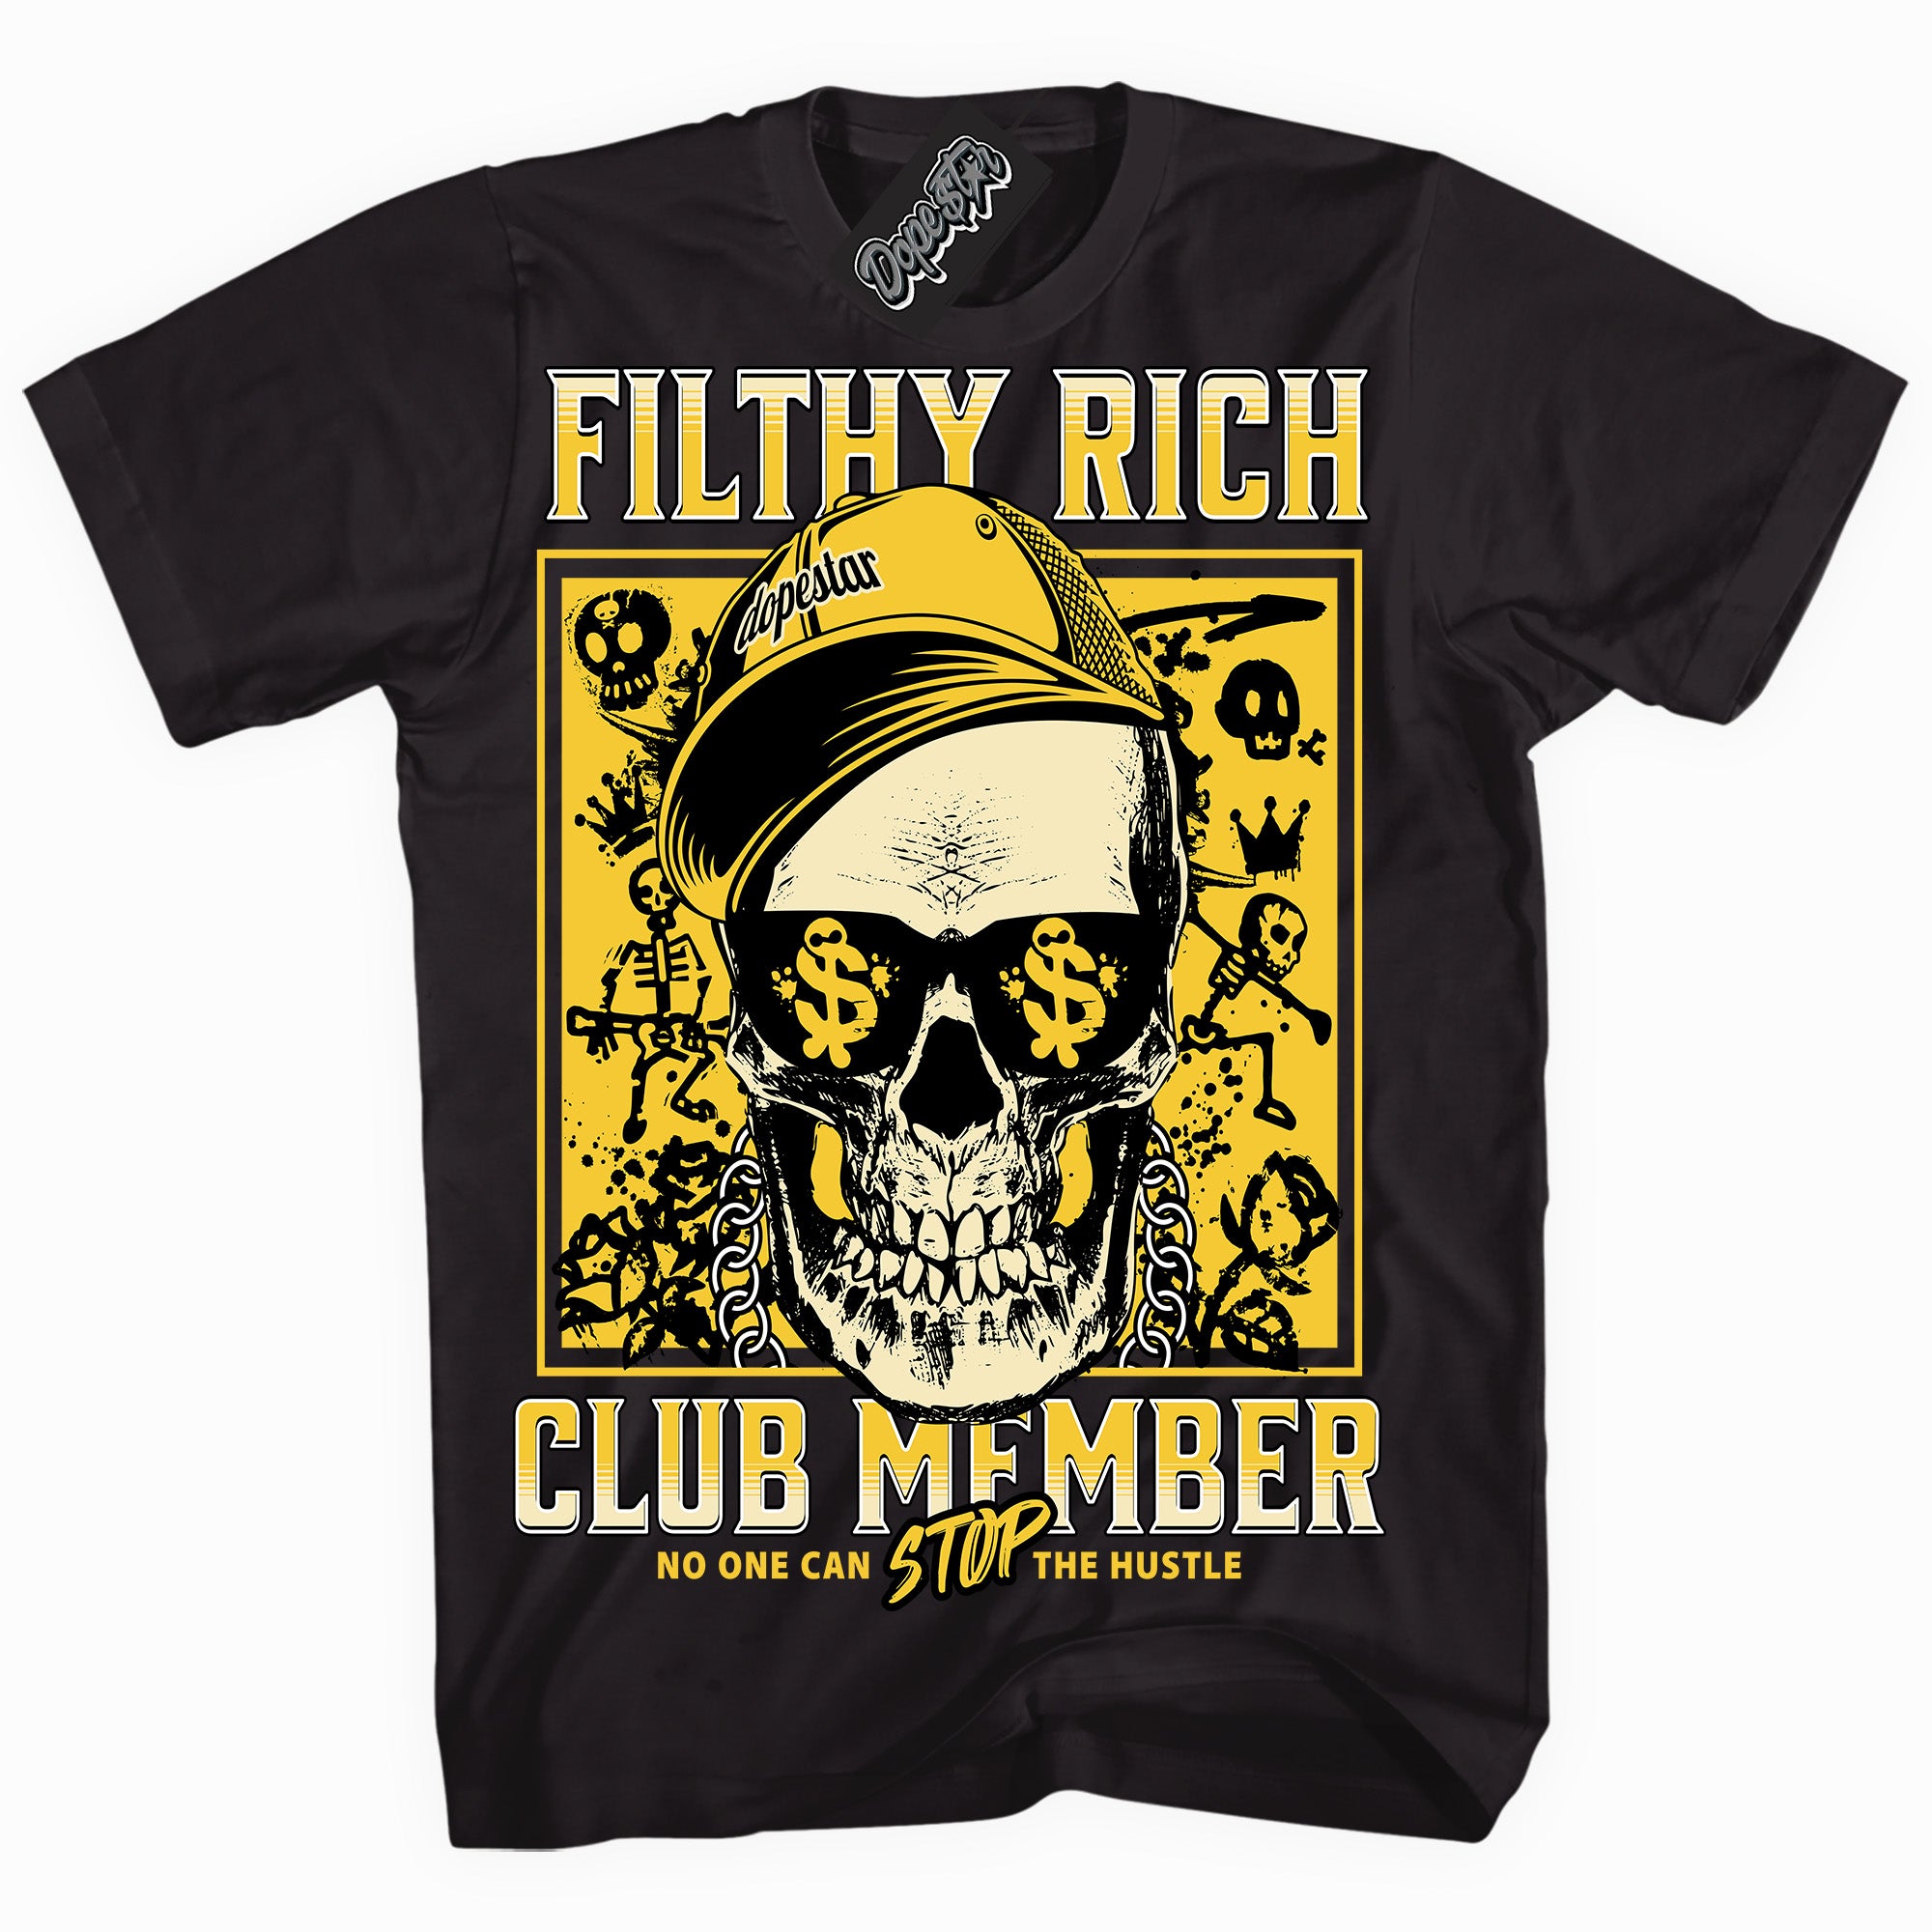 Cool Black Shirt With Filthy Rich design That Perfectly Matches YELLOW THUNDER 4s Sneakers.